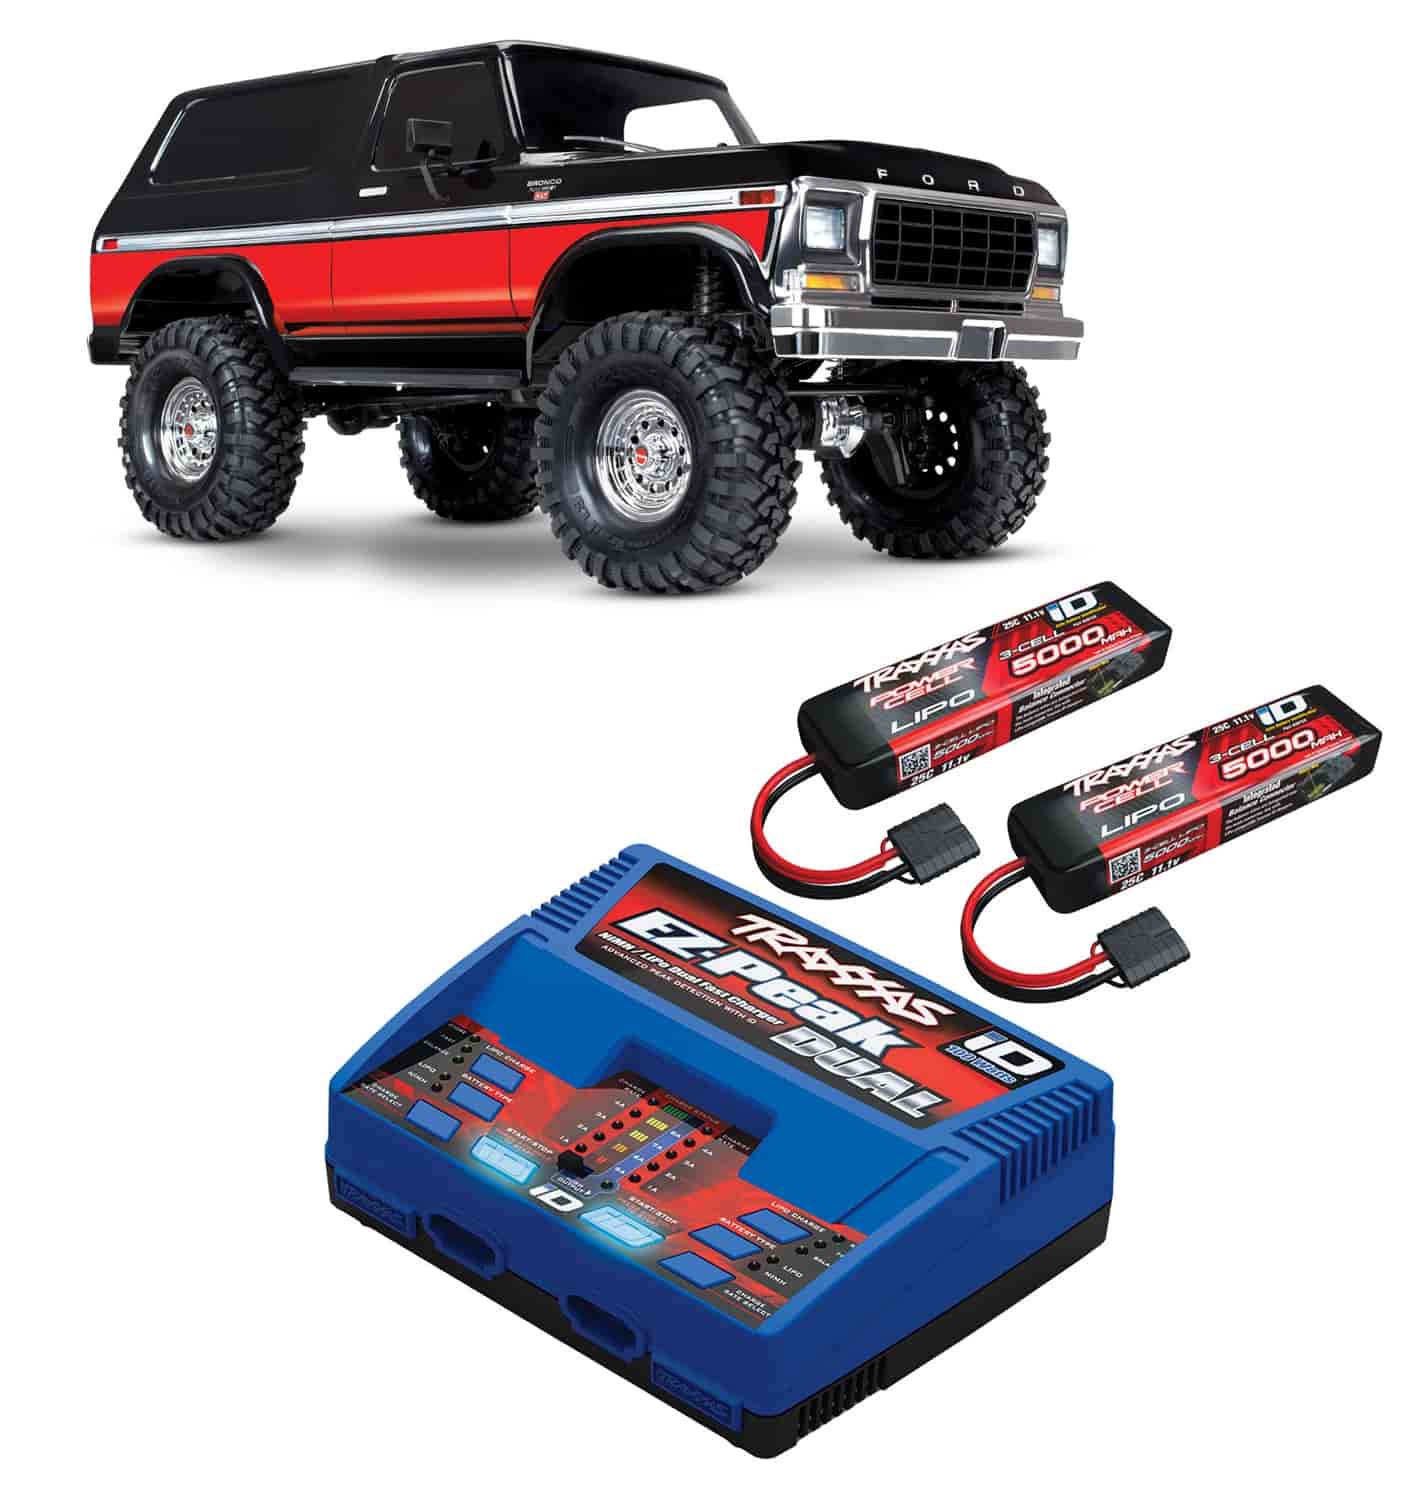 Traxxas TRX-4 Ford Bronco 4WD Truck Combos | Traxxas - JEGS High Performance